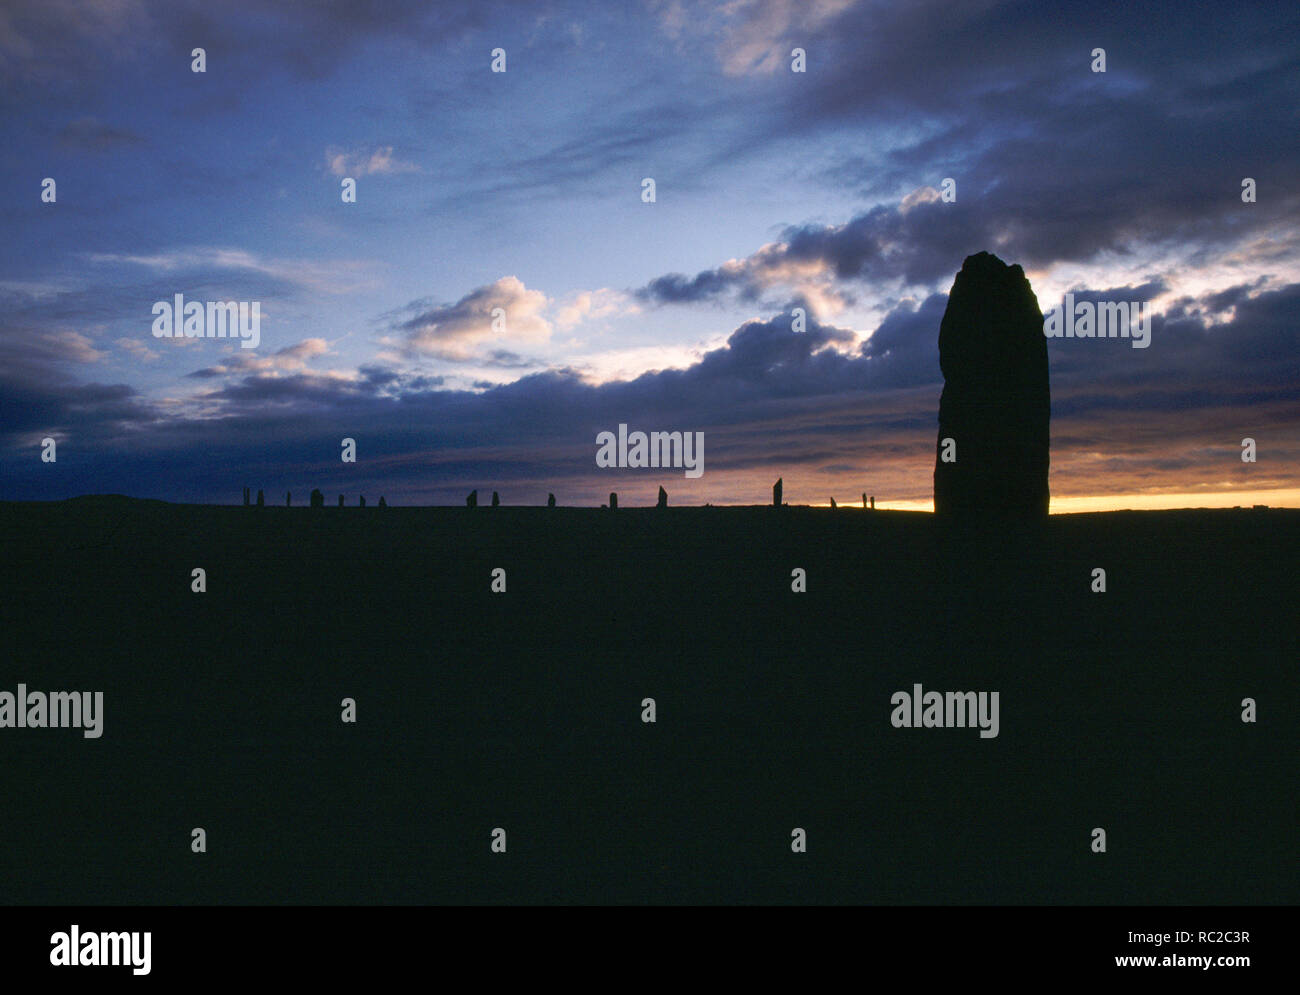 The Comet Stone outlier and Ring of Brodgar prehistoric stone circle & henge, Mainland Orkney, Scotland. Looking north west after sunset. Stock Photo